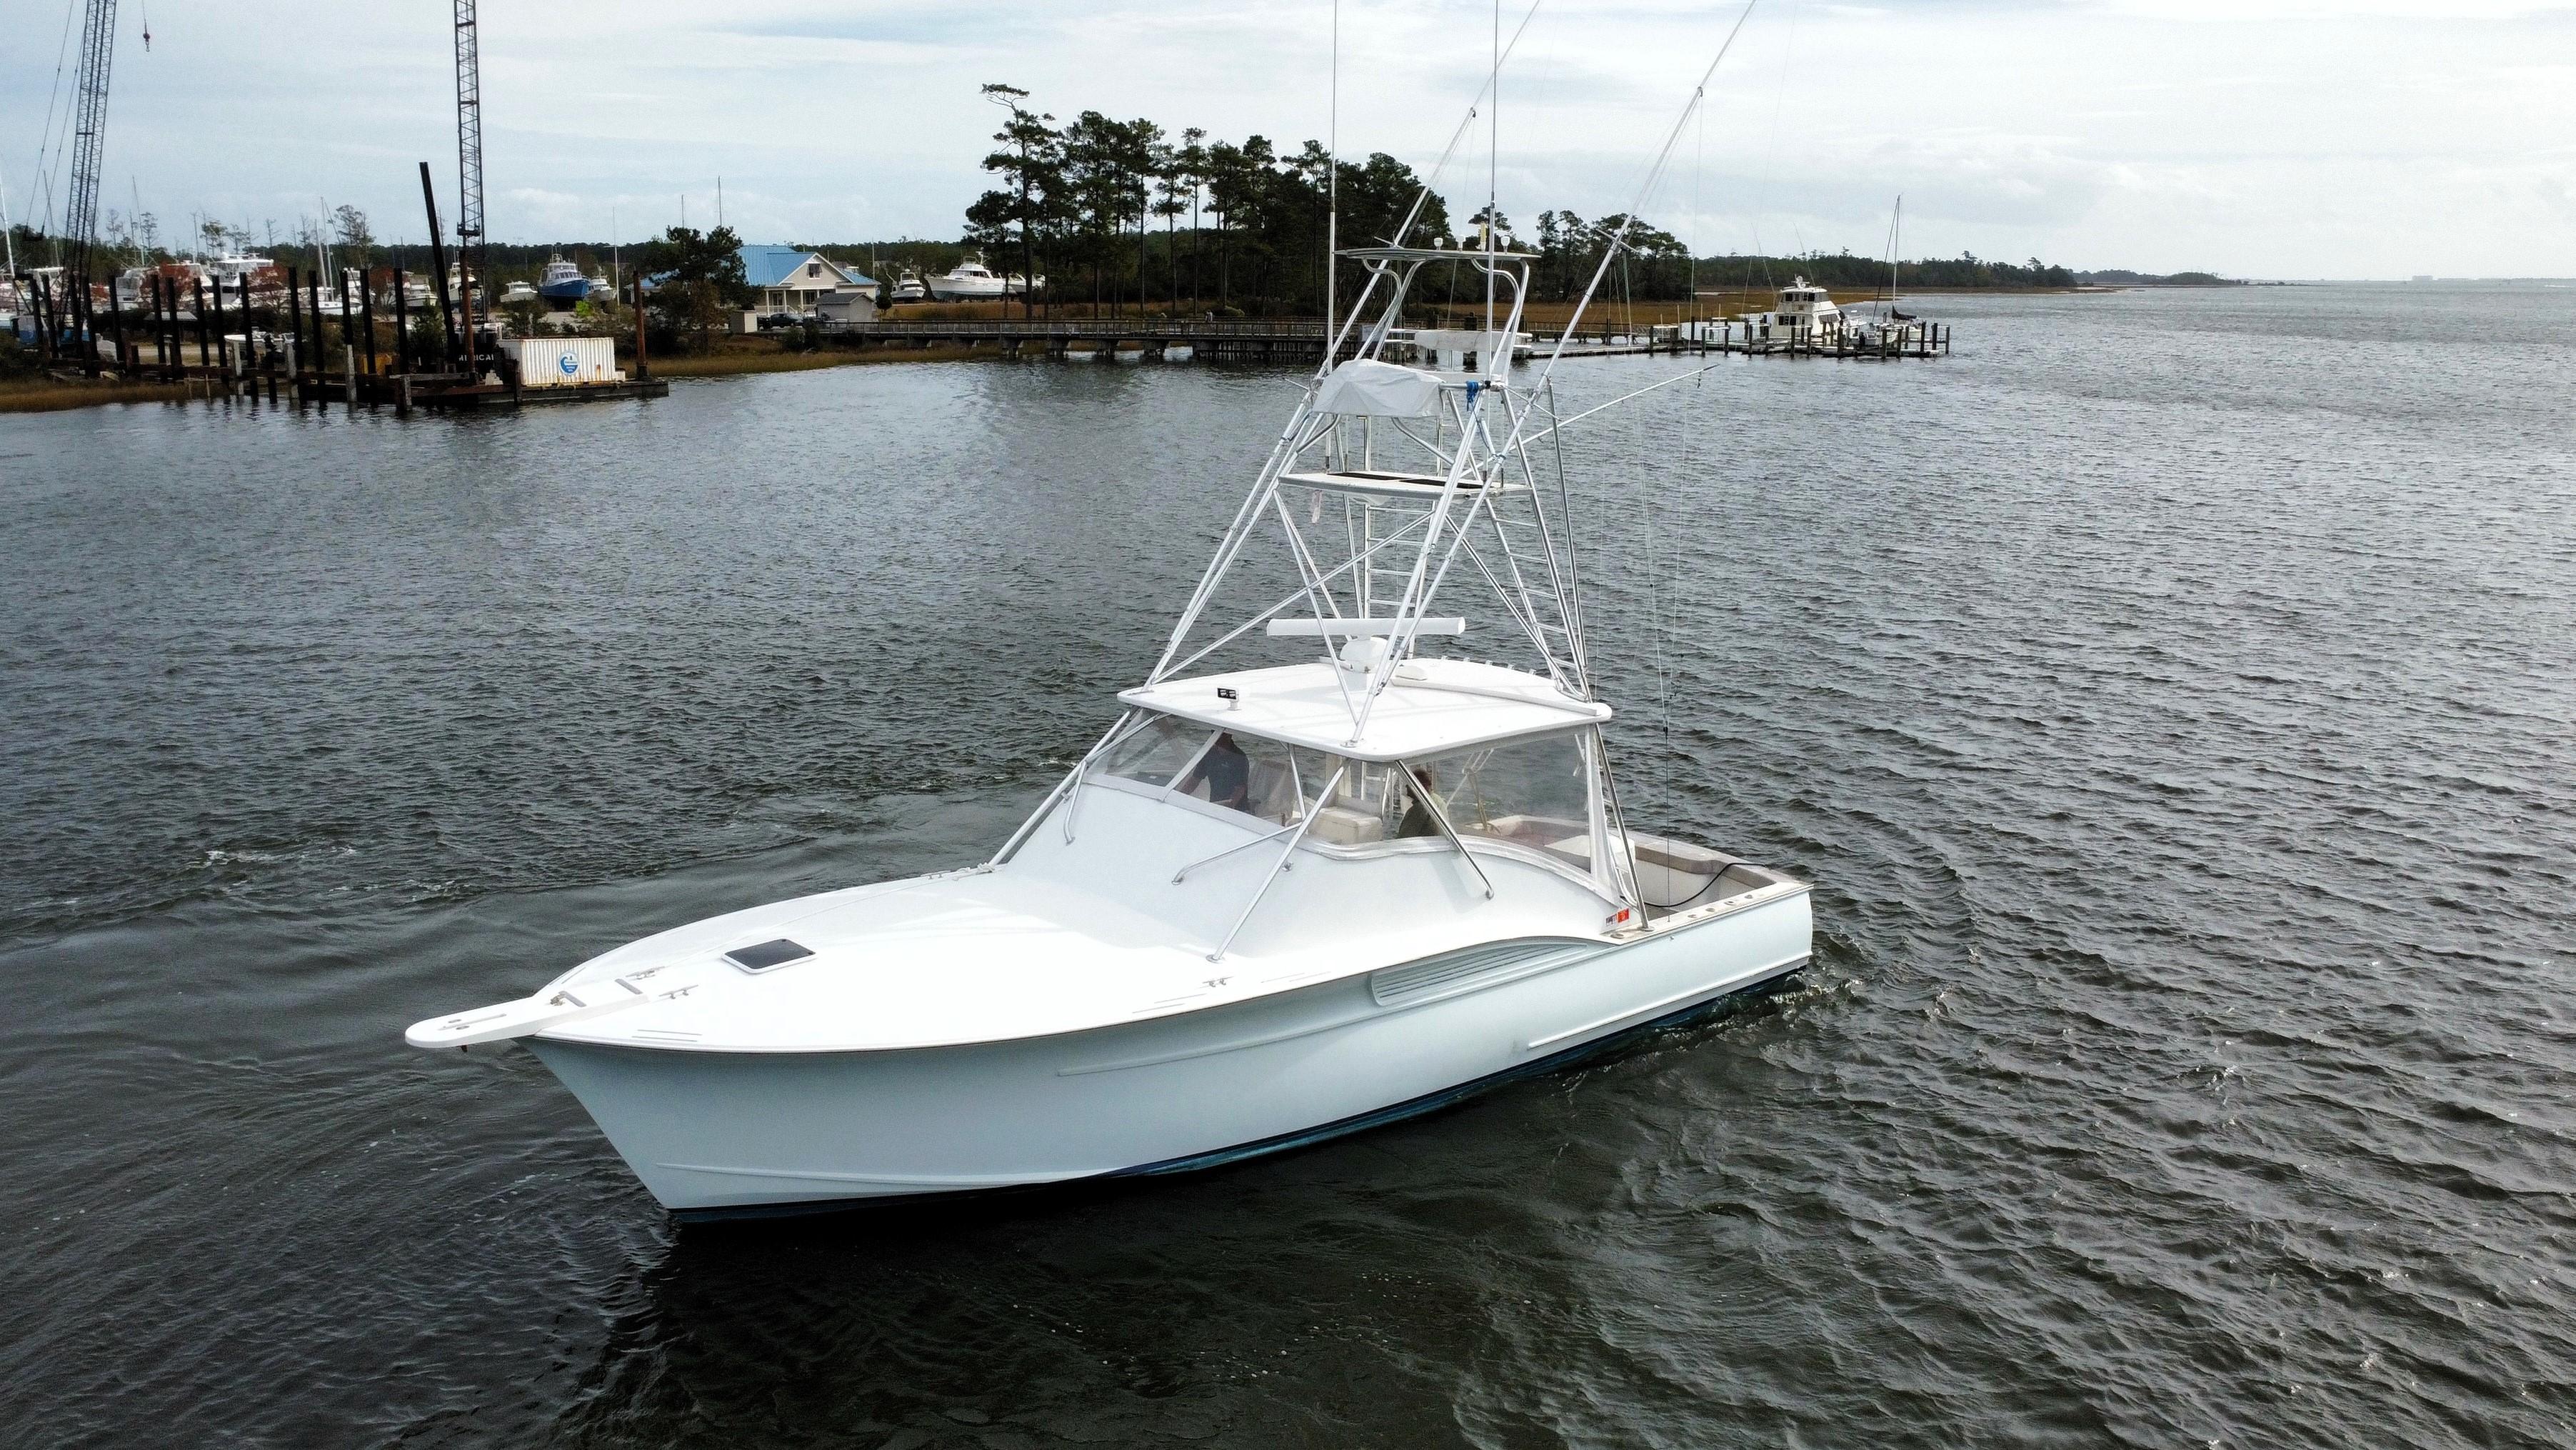 Saltwater Fishing boats for sale in North Carolina - Boat Trader